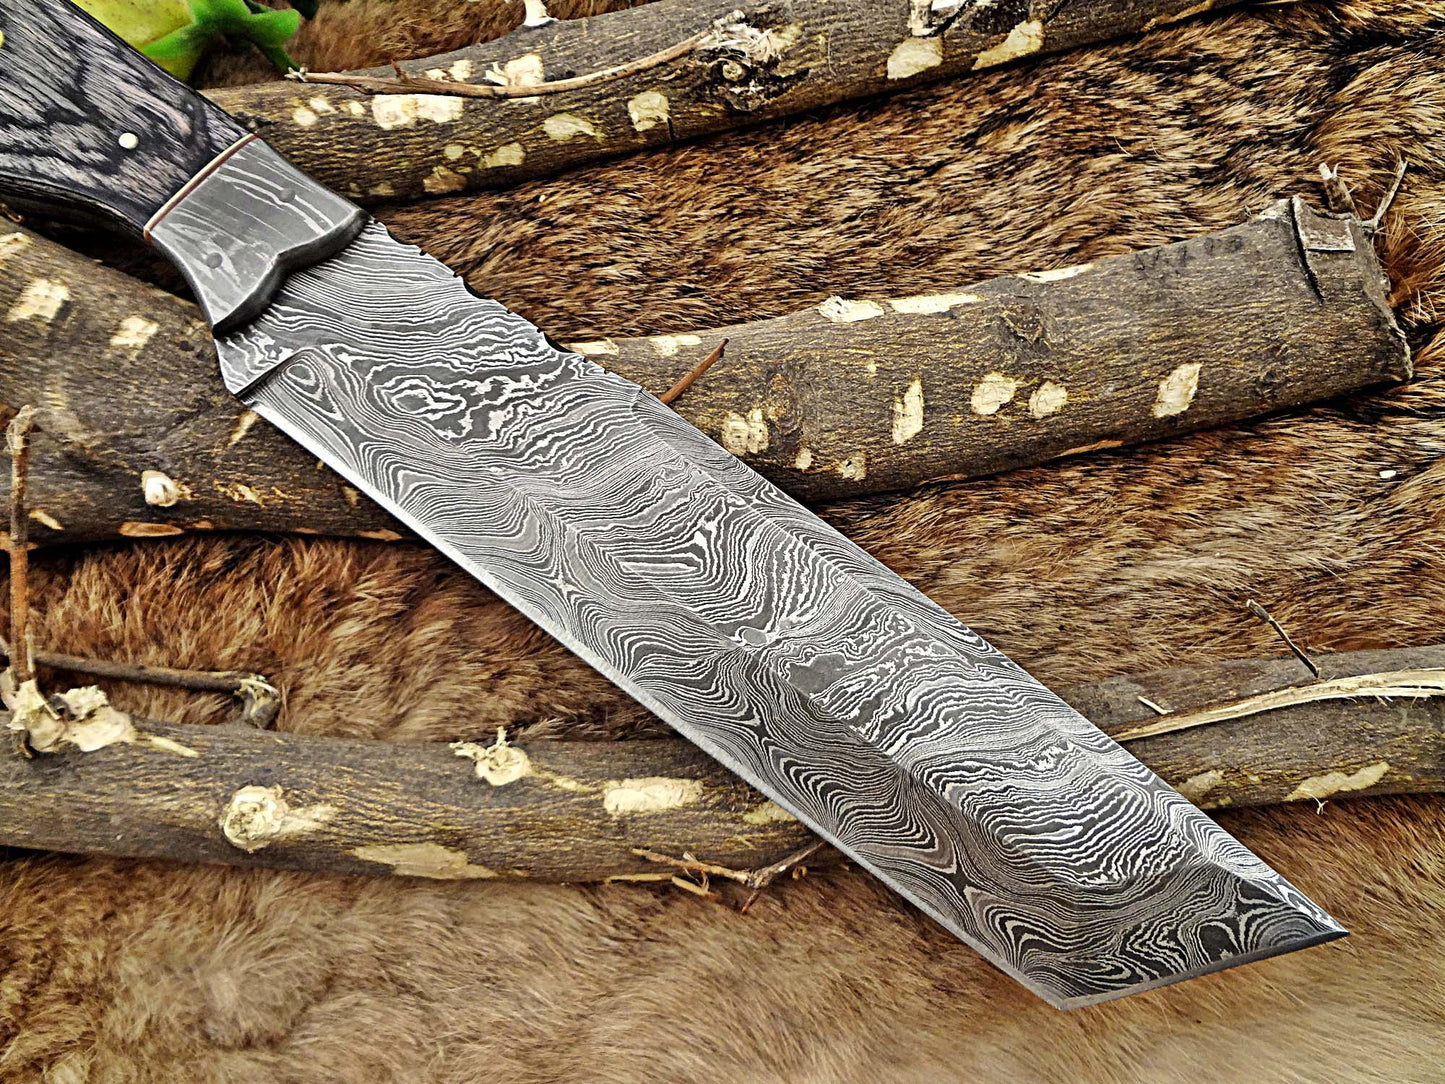 Custom made hand forged Damascus steel full tang blade kitchen knife set,  Overall 45 inches Length of Damascus sharp knives (10.6+9.6+9.0+8.0+7.6)